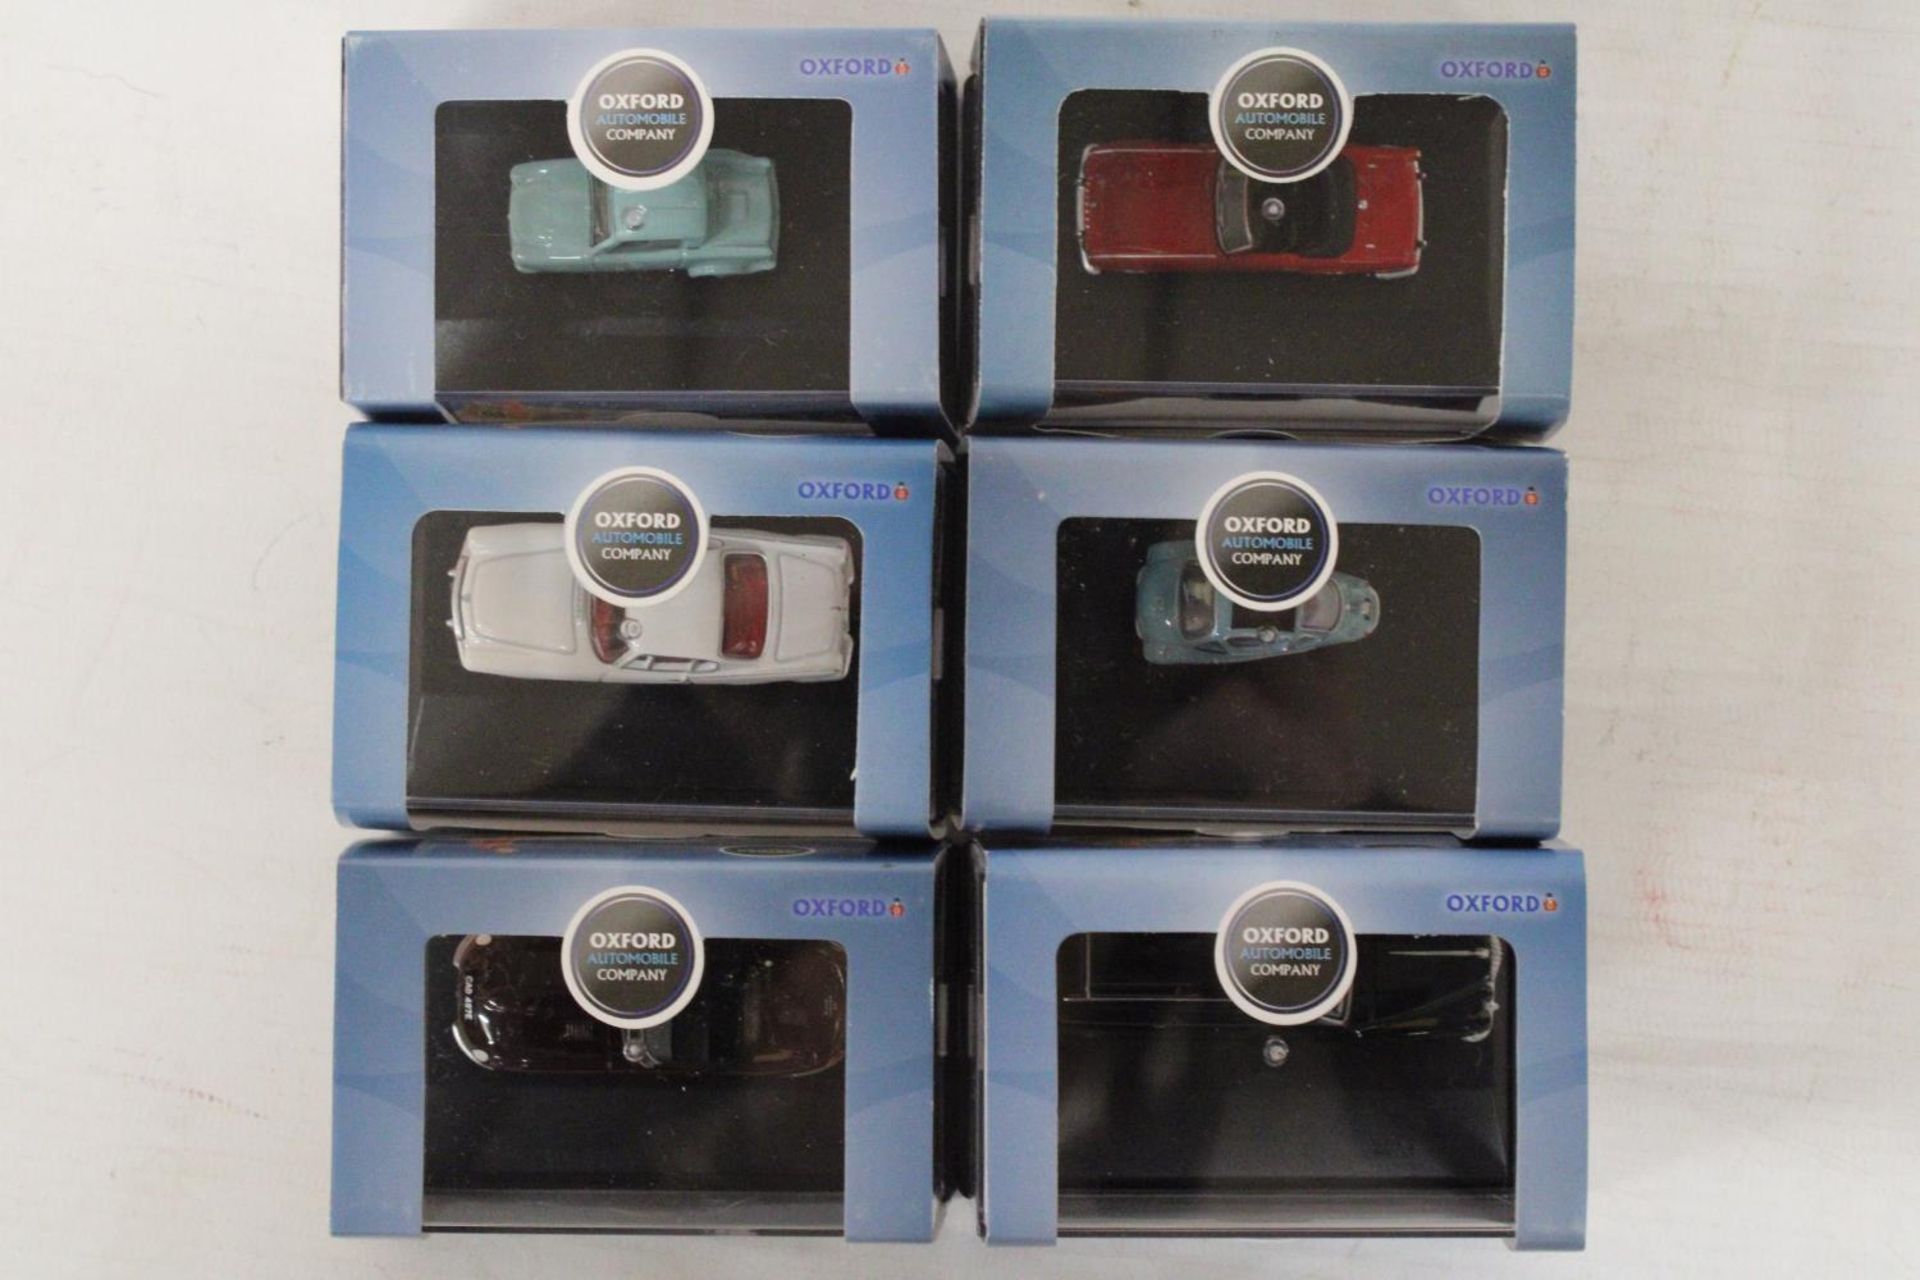 SIX VARIOUS AS NEW AND BOXED OXFORD AUTOMOBILE COMPANY VEHICLES - Image 6 of 6